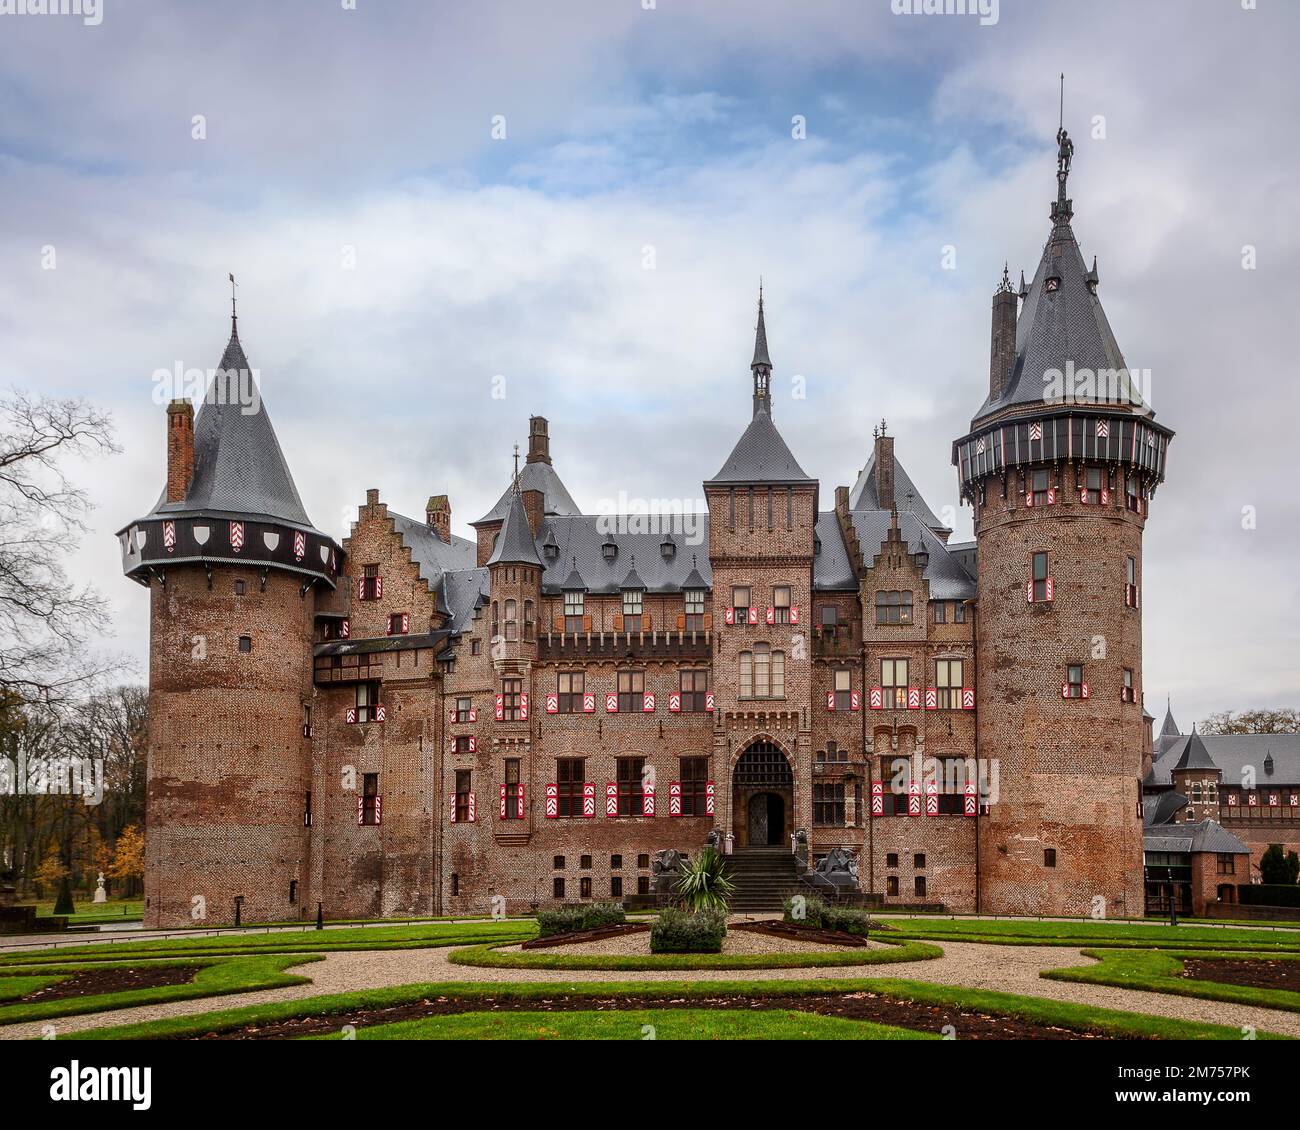 DE HAAR CASTLE, the largest castle in Holland and its ideal image of a medieval fortress with towers and ramparts, moats, gates and drawbridges. Stock Photo